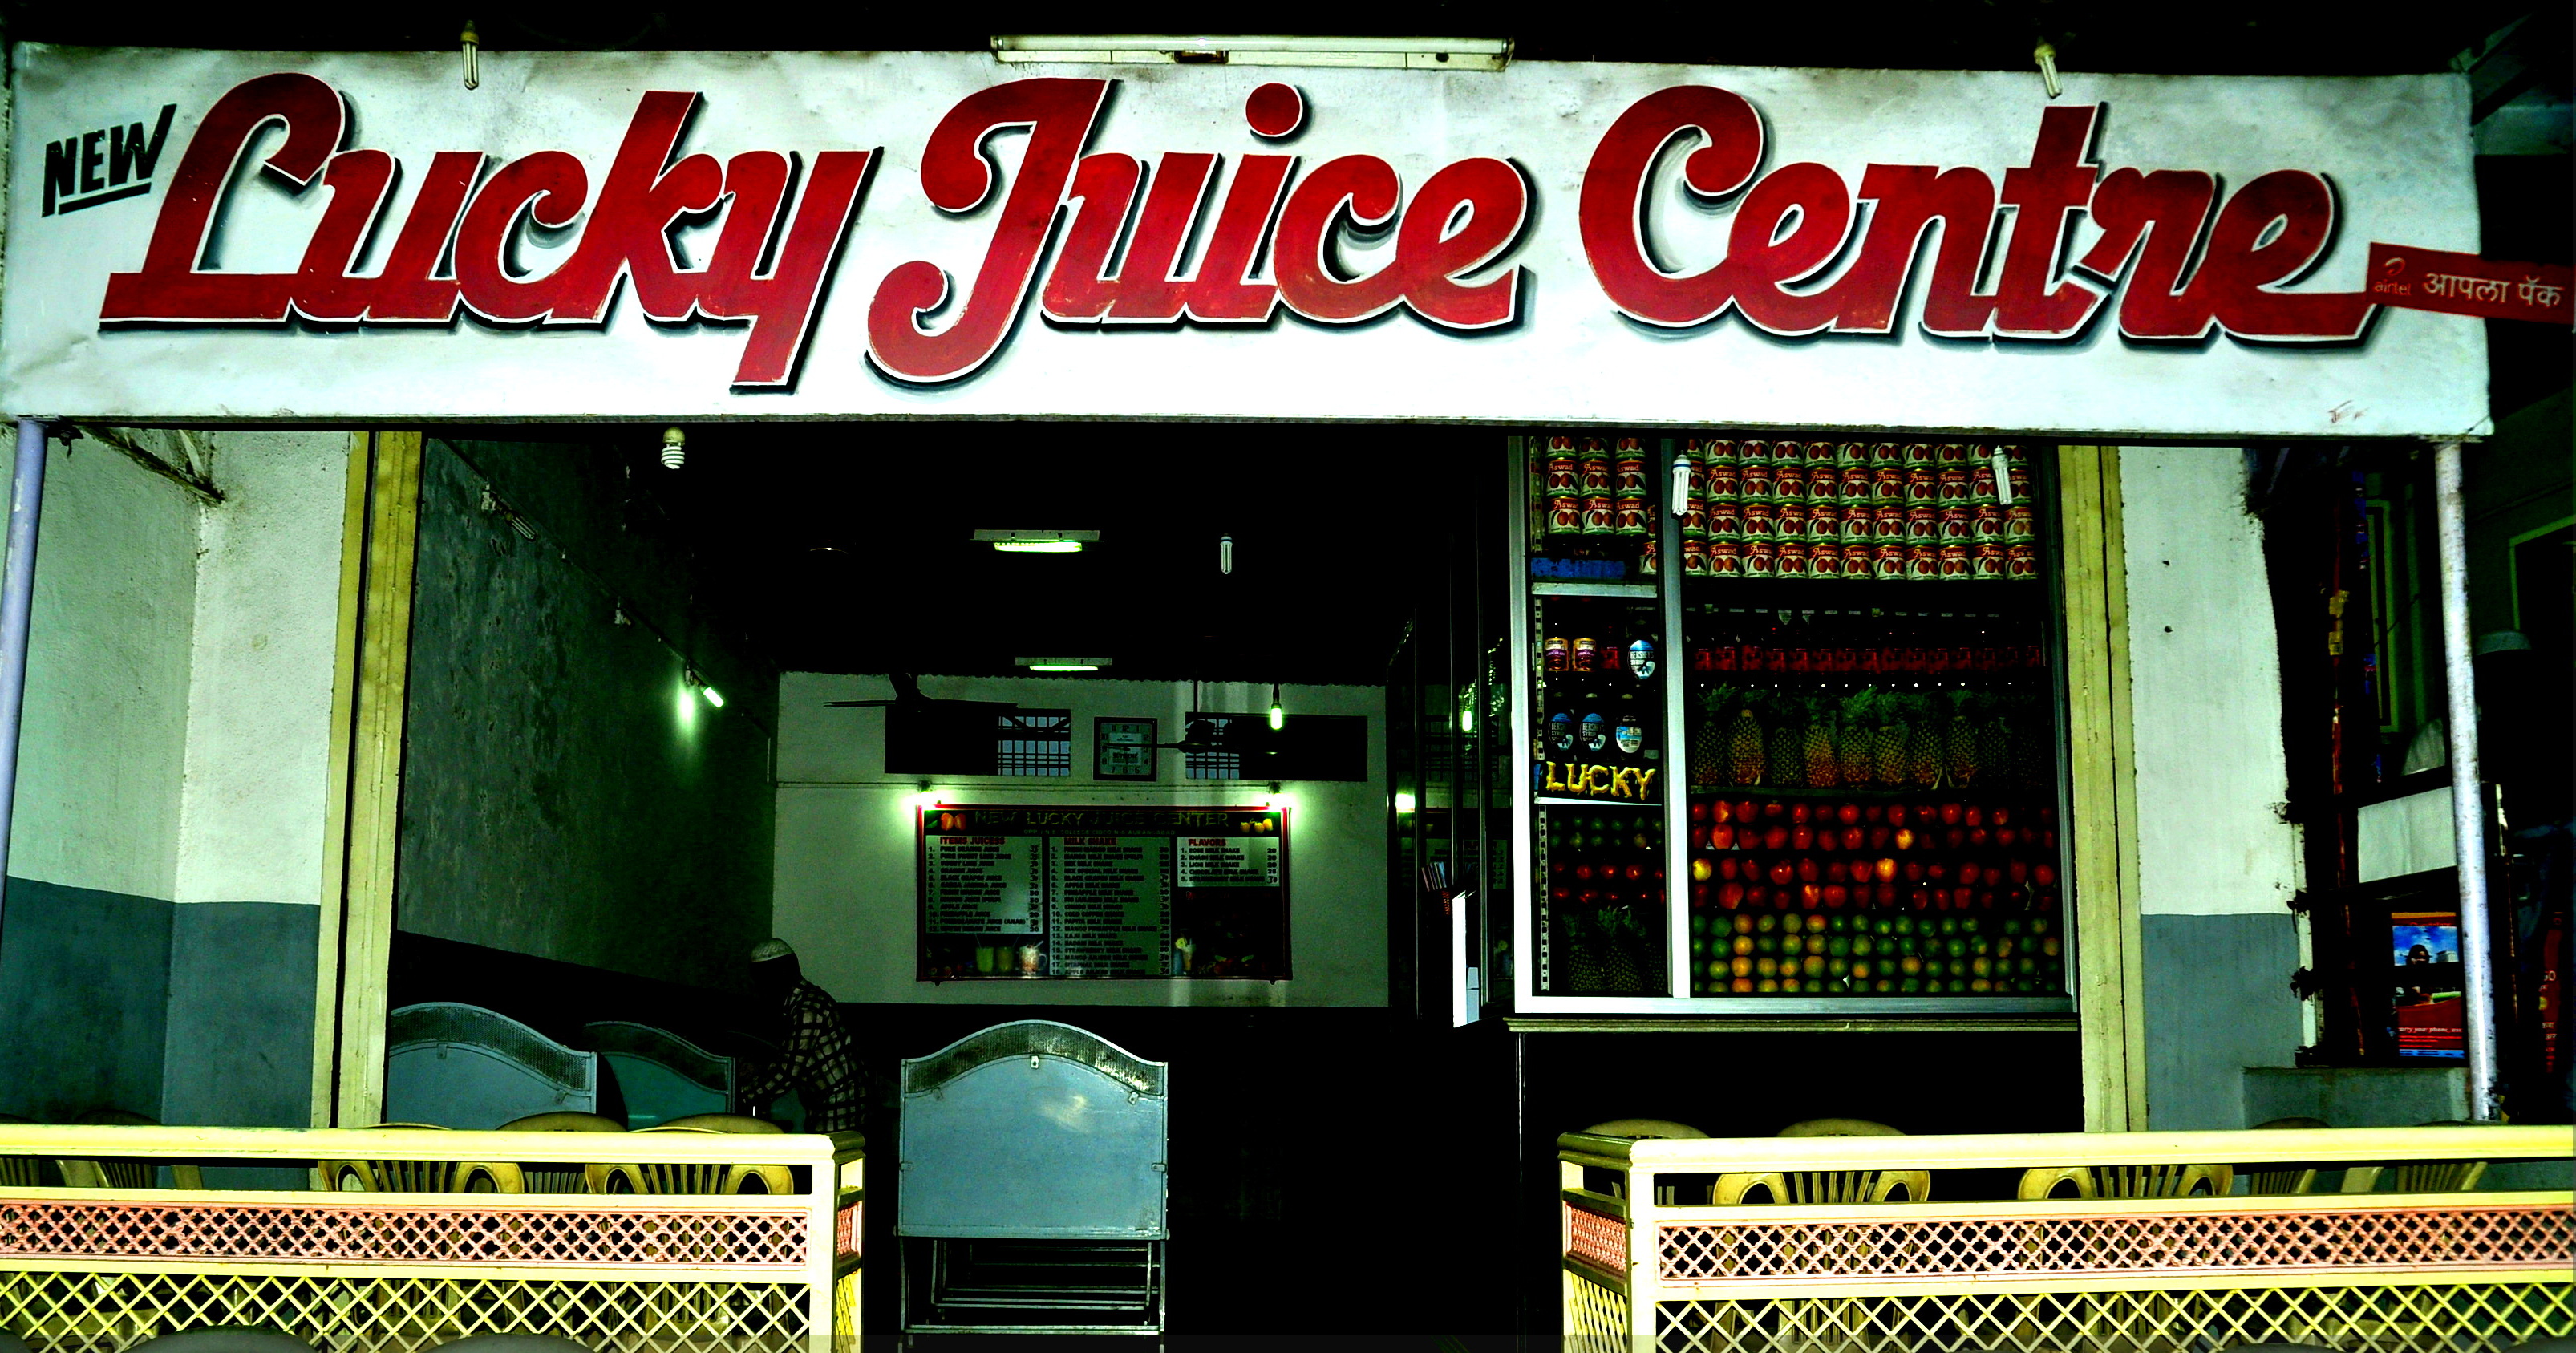 New Lucky Juice Center – one of the many competitors of the original center located in Cidco